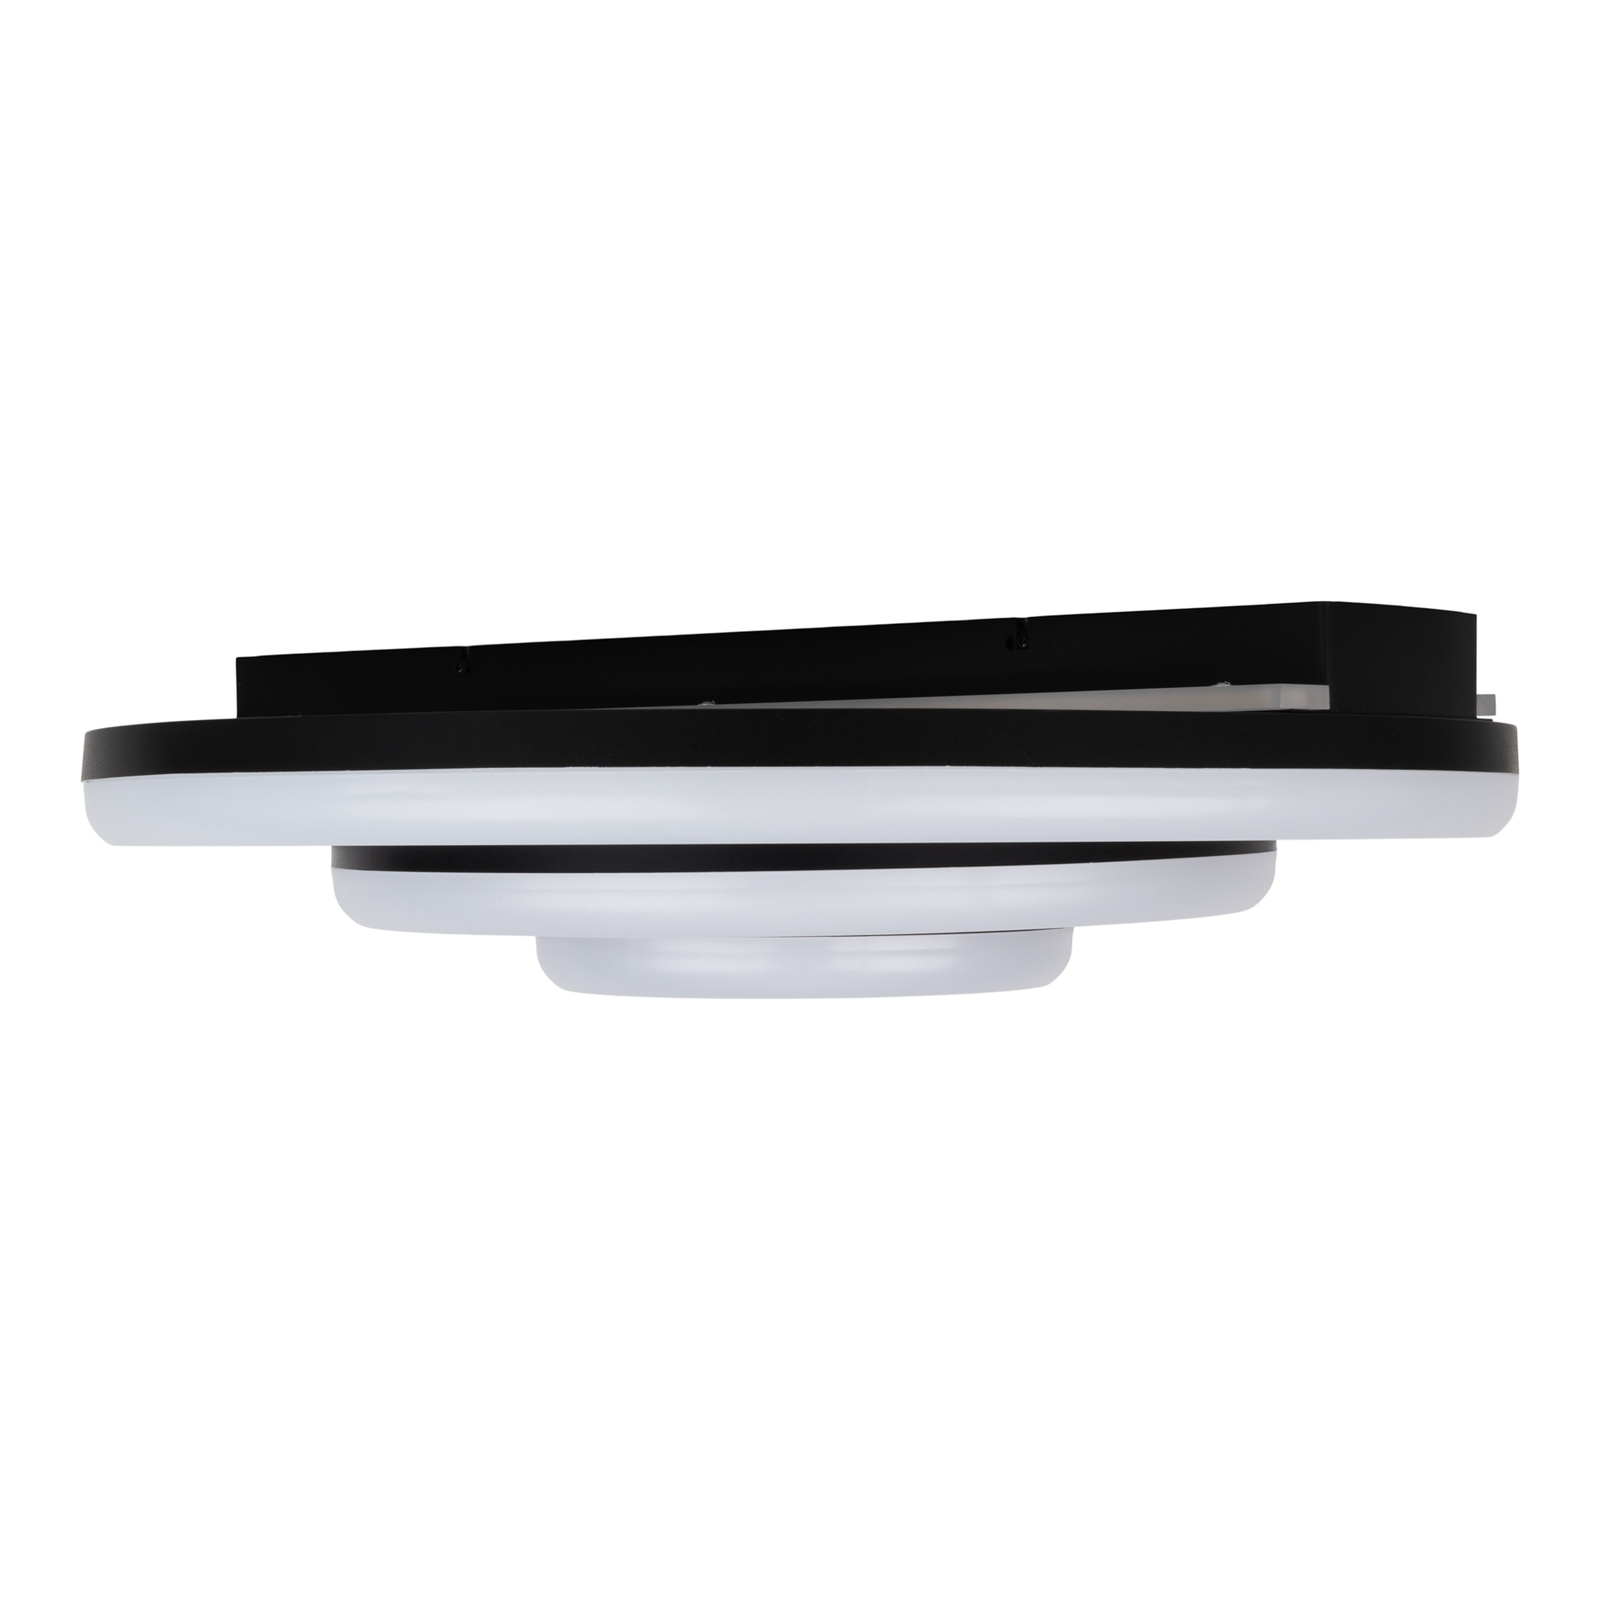 LED ceiling light CCT, three rings, remote control